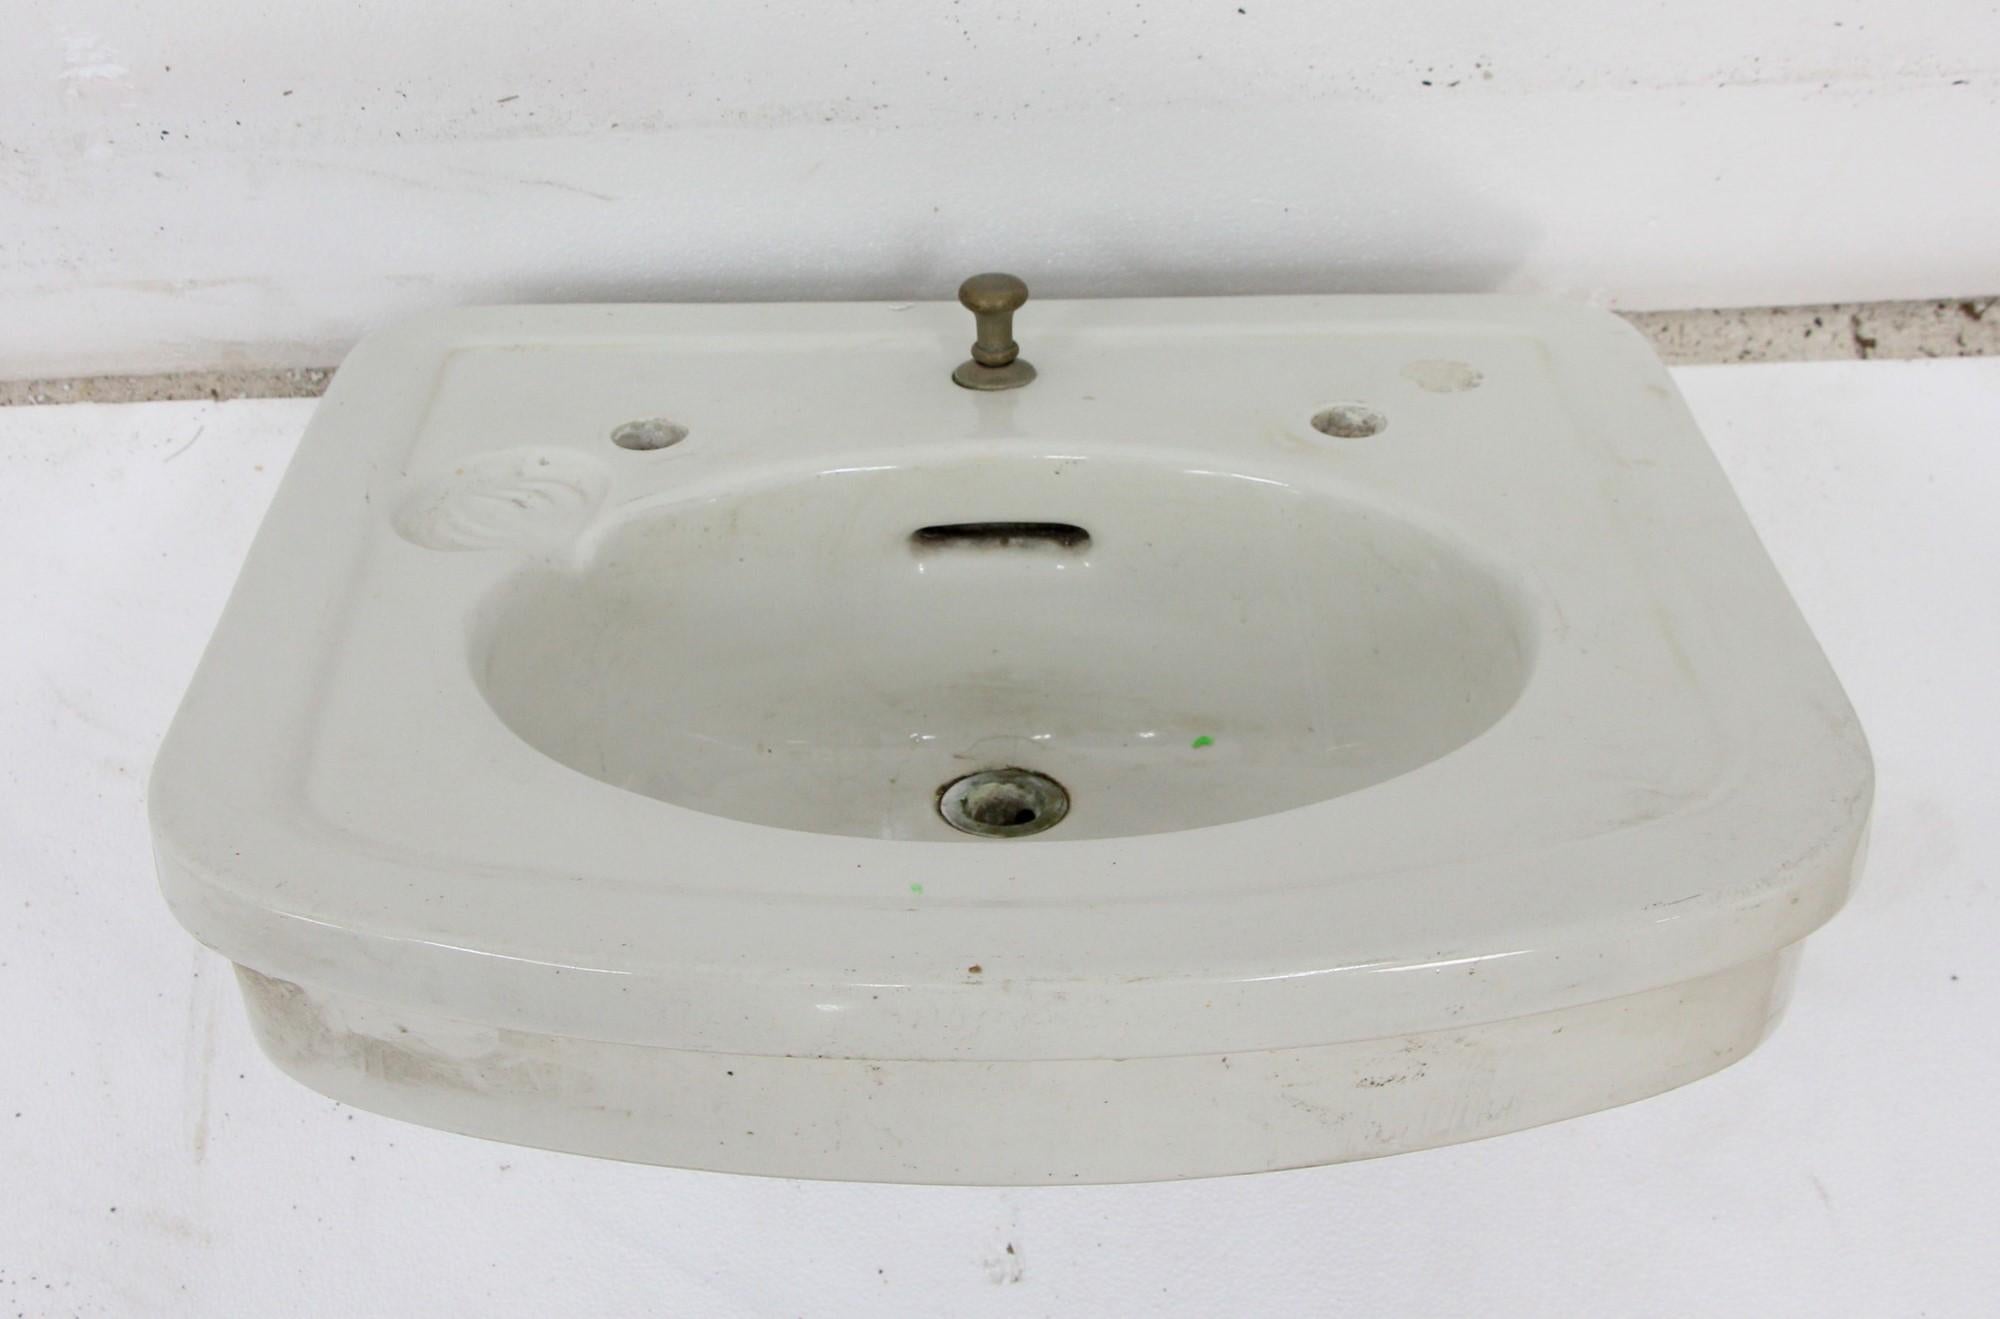 Antique white porcelain wall mount sink with built in soap dish and a curved front edge . Made by The Trenton Potteries Company. Pat. Nov. 4, 1902. This can be seen at our 400 Gilligan St location in Scranton, PA.